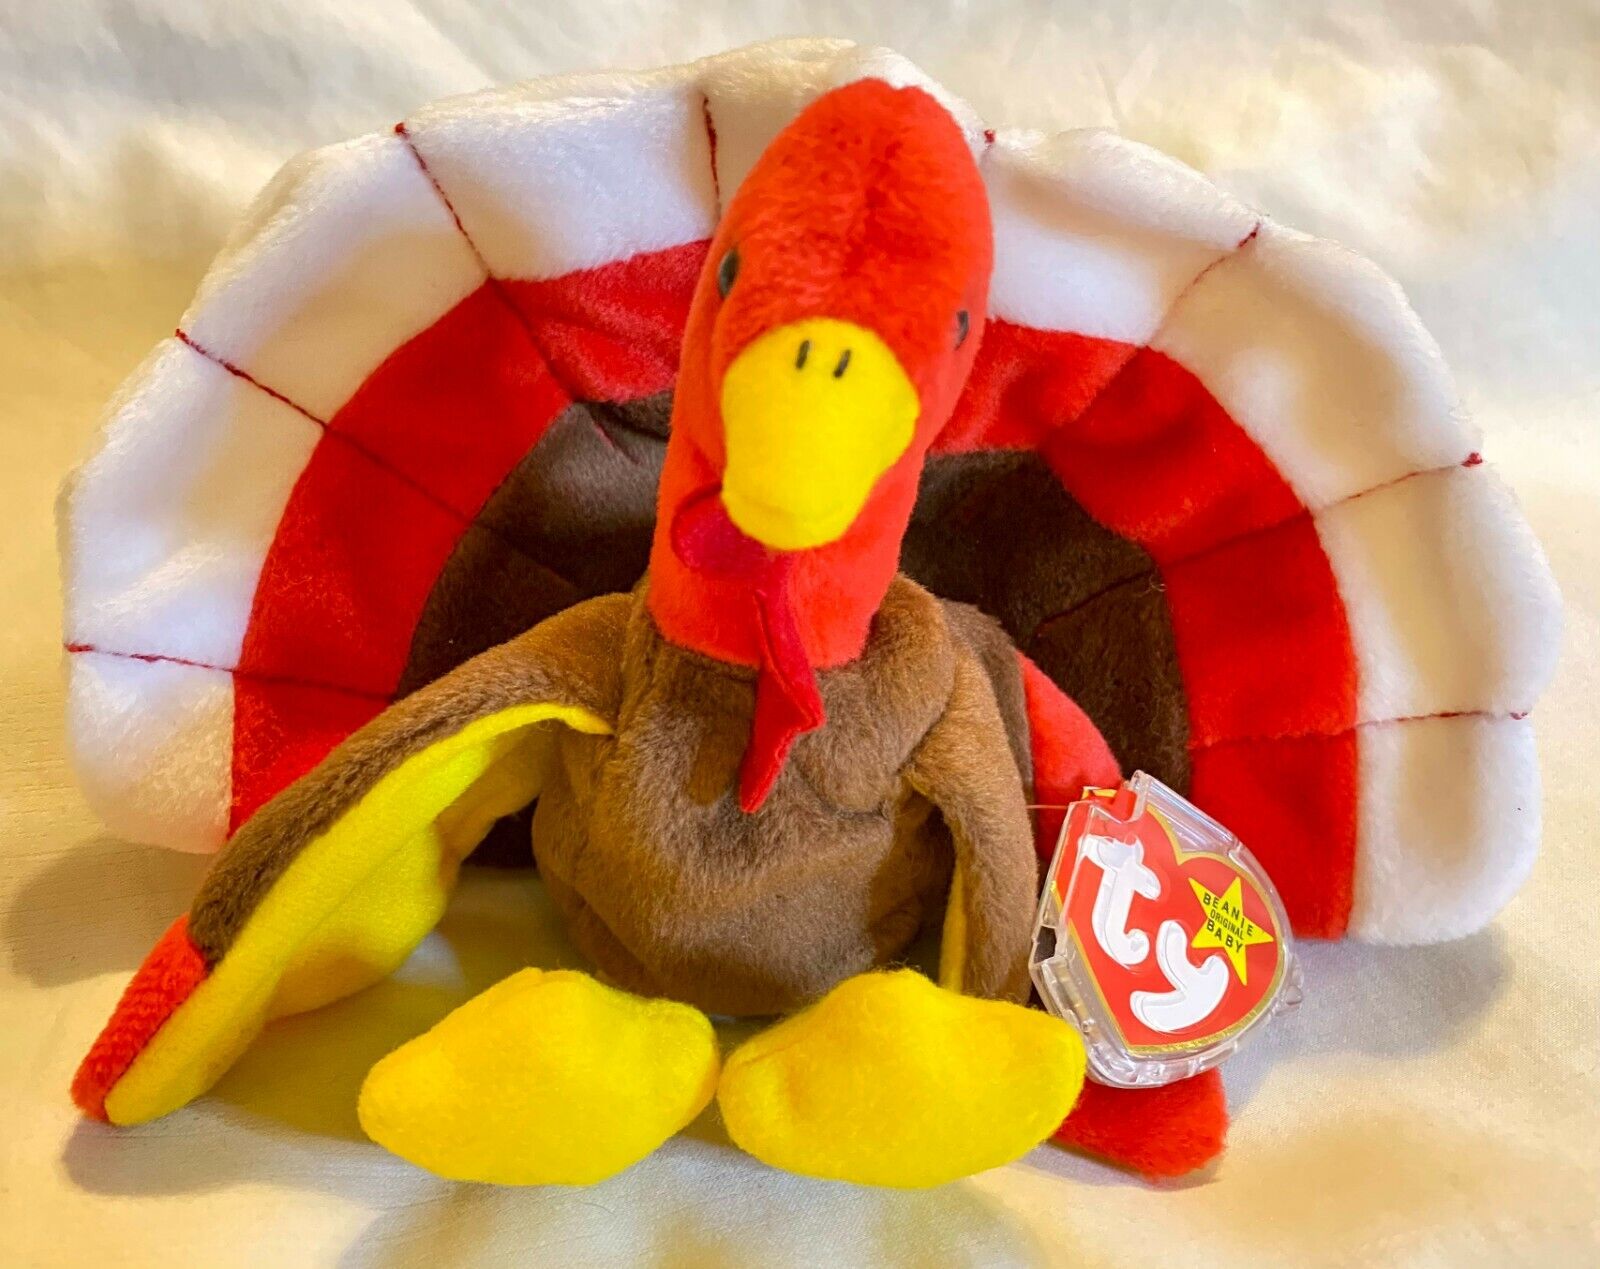 Gobbles the thanksgiving turkey. Unsewn double waddle...